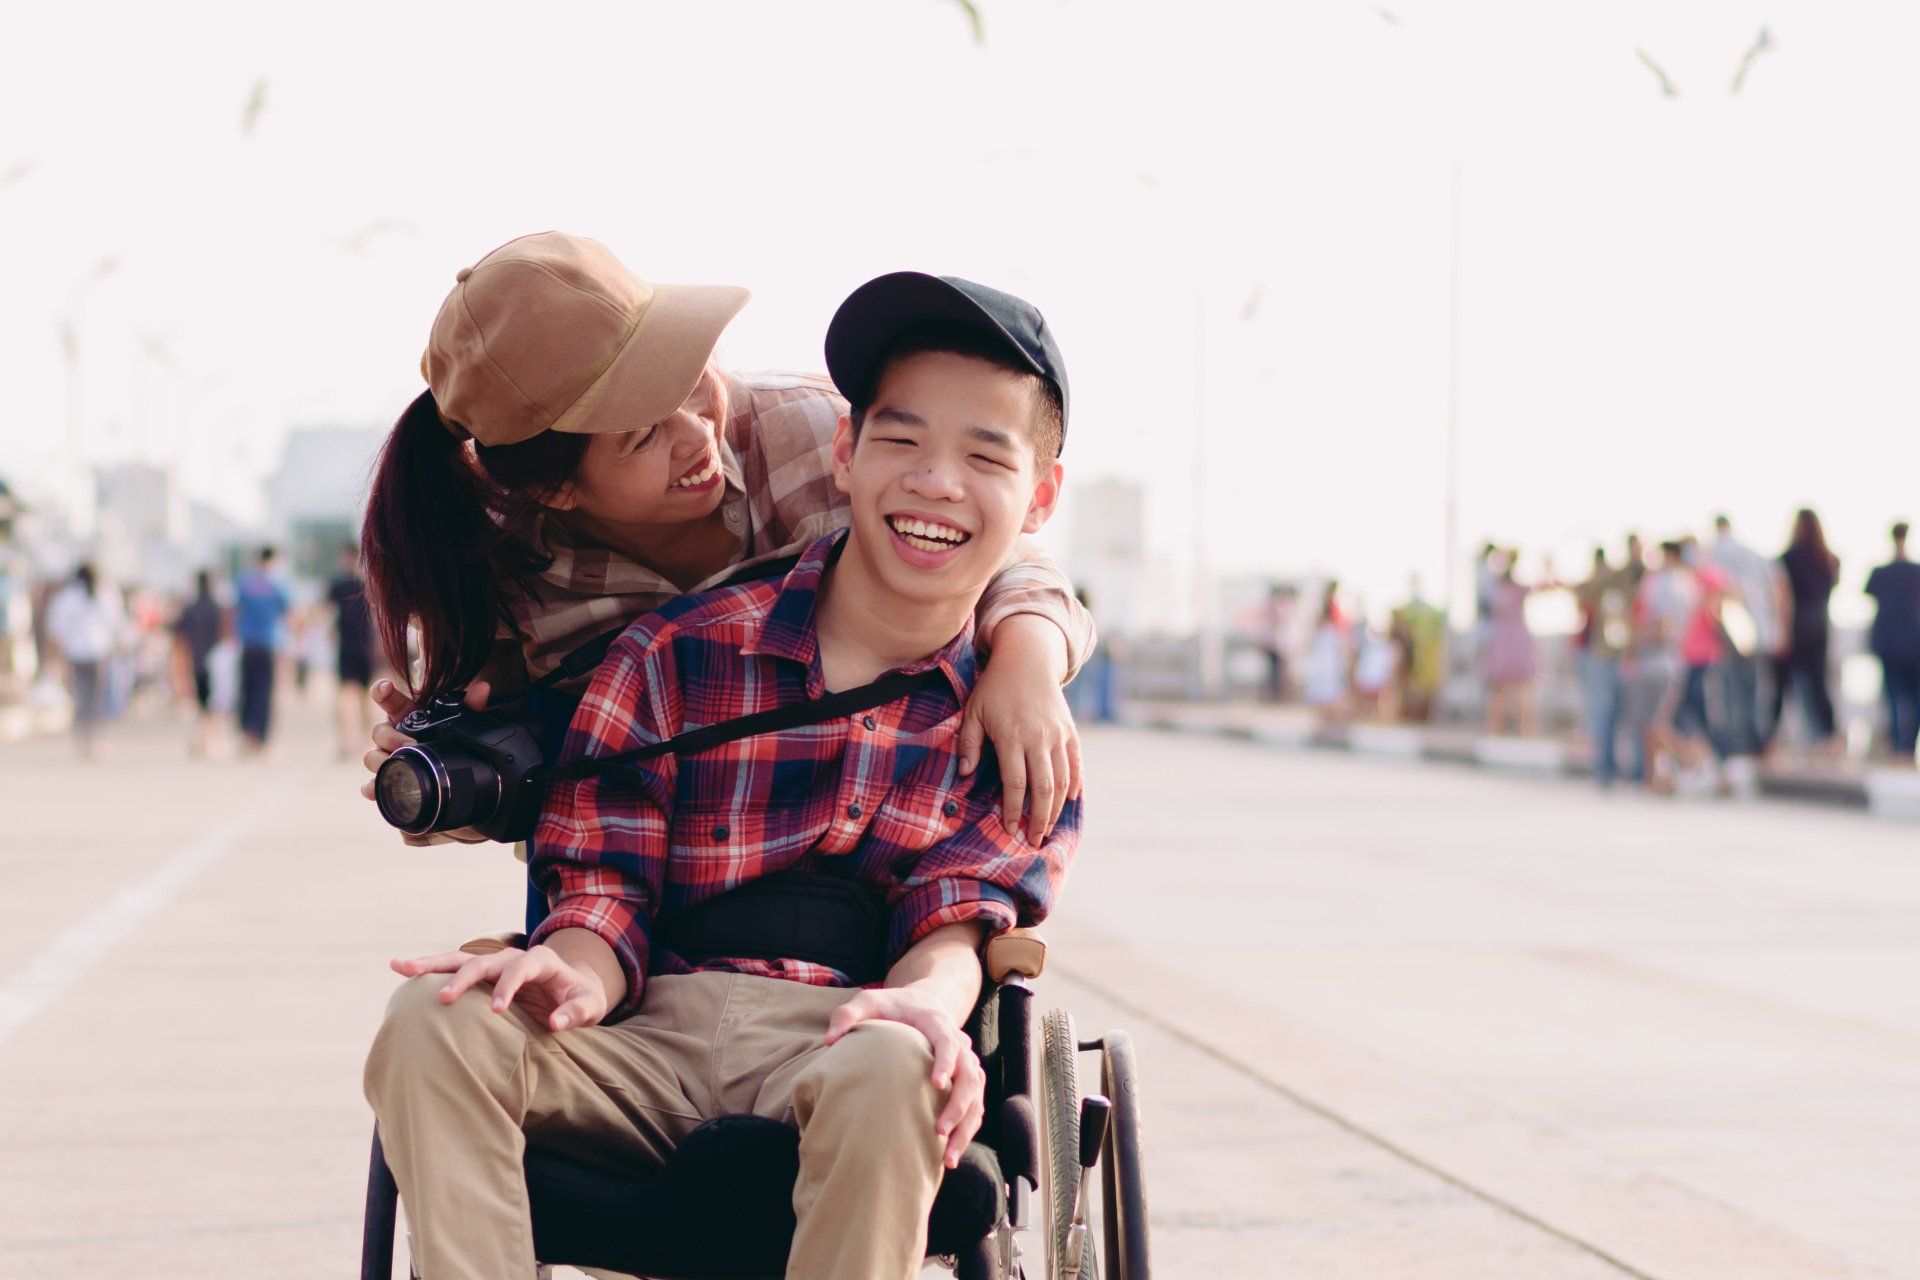 Boy in wheelchair with mom and camera smiling